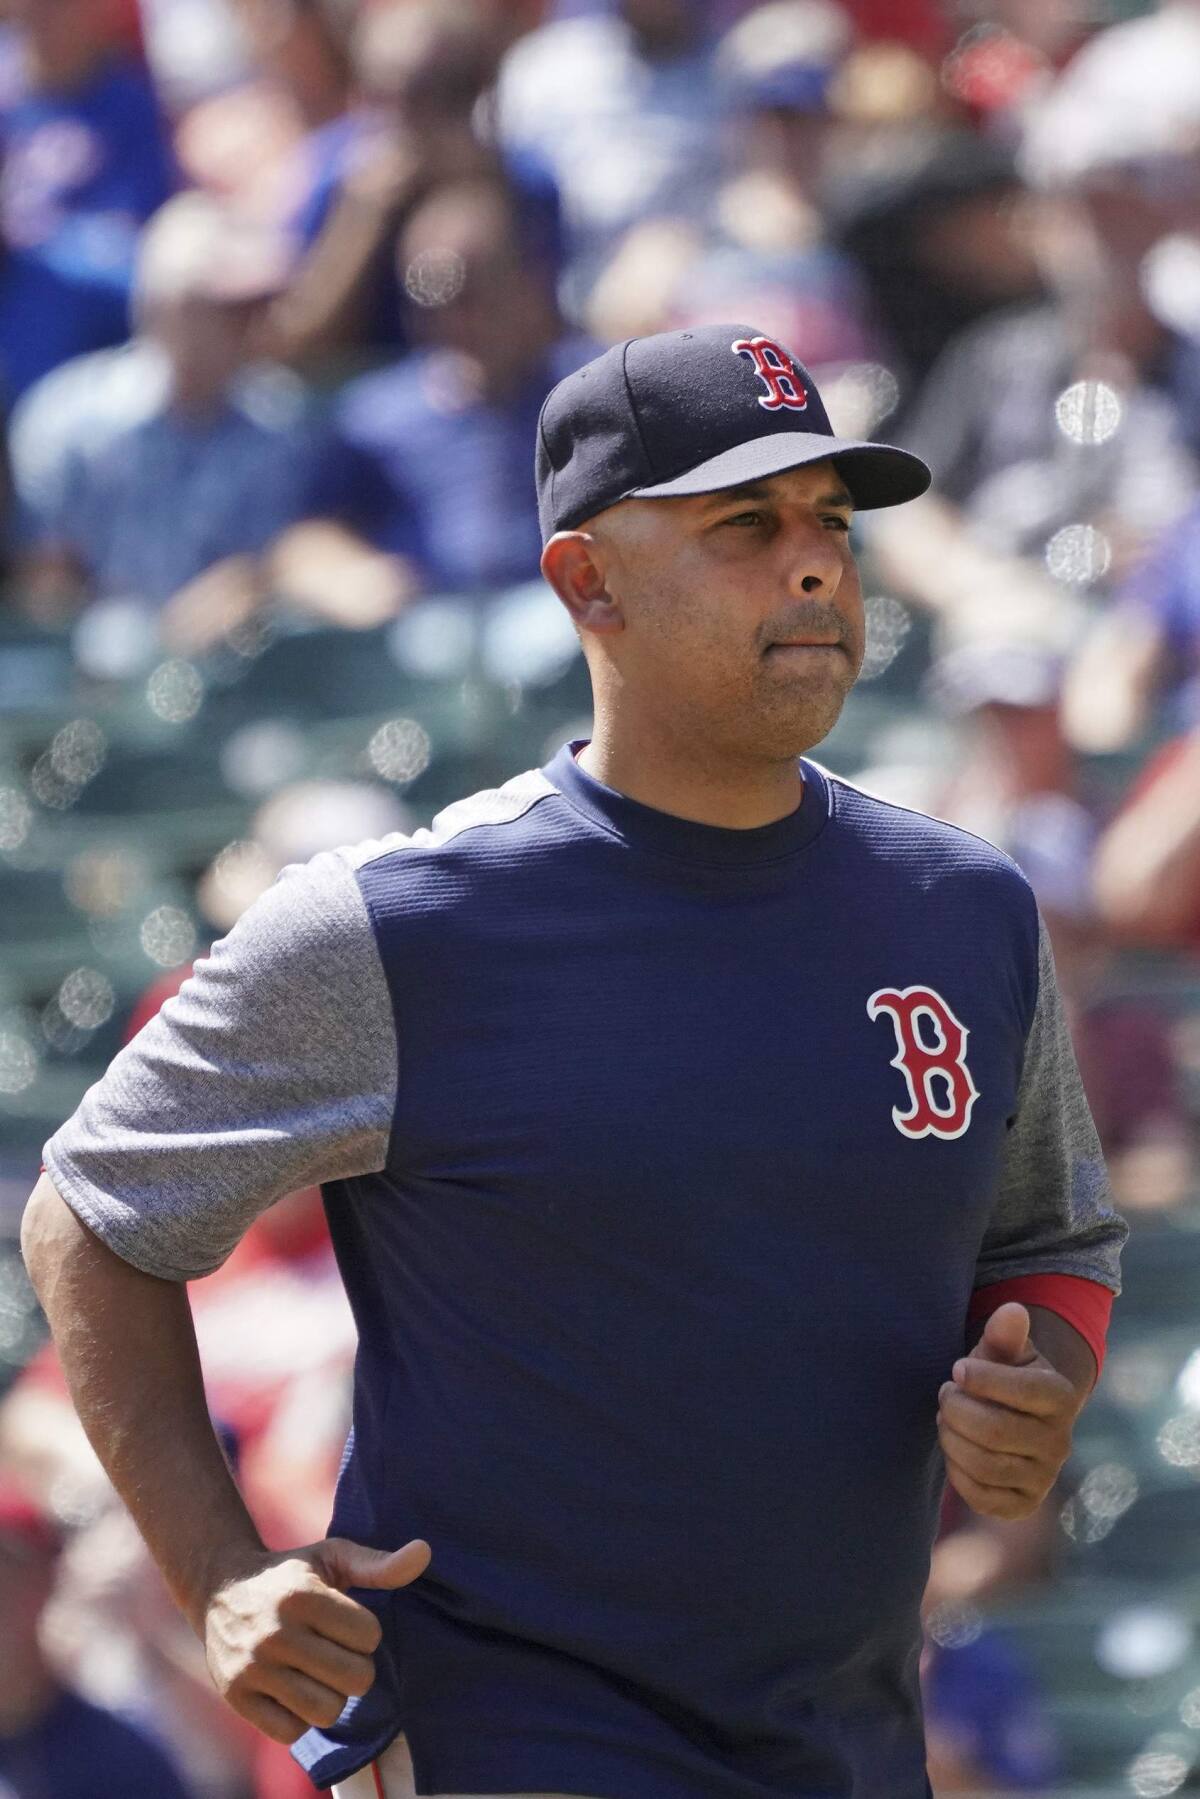 Red Sox manager Alex Cora fired in sign-stealing scandal - Los Angeles Times